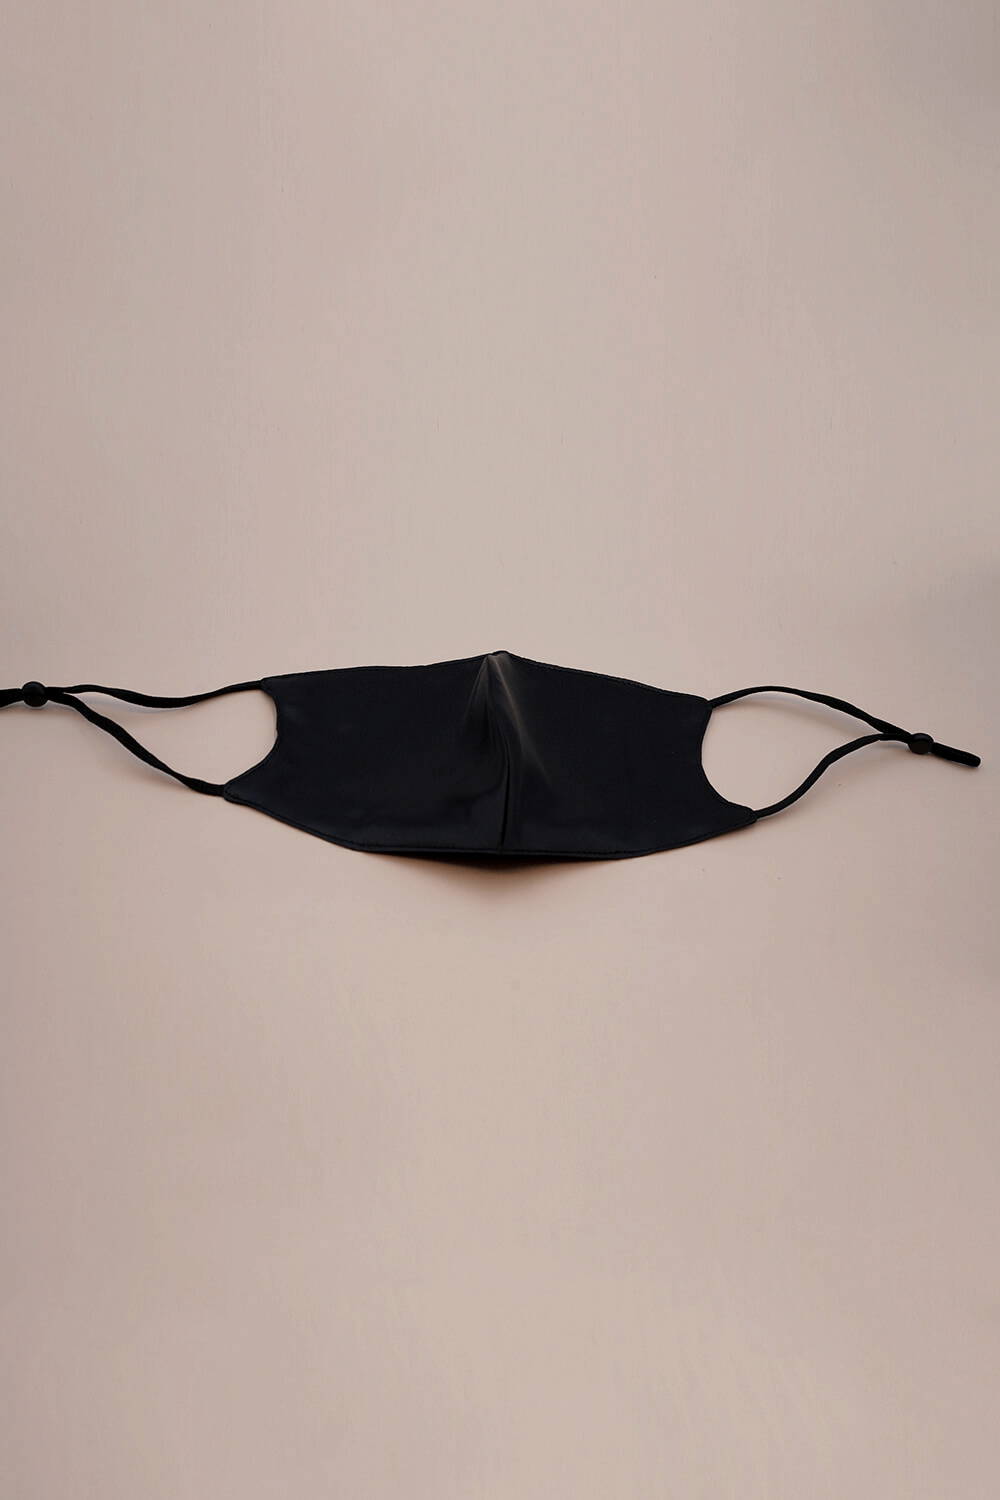 STELLAR Silk Face Mask - Black (with Nose Wire and Filter Pocket) - BASK™